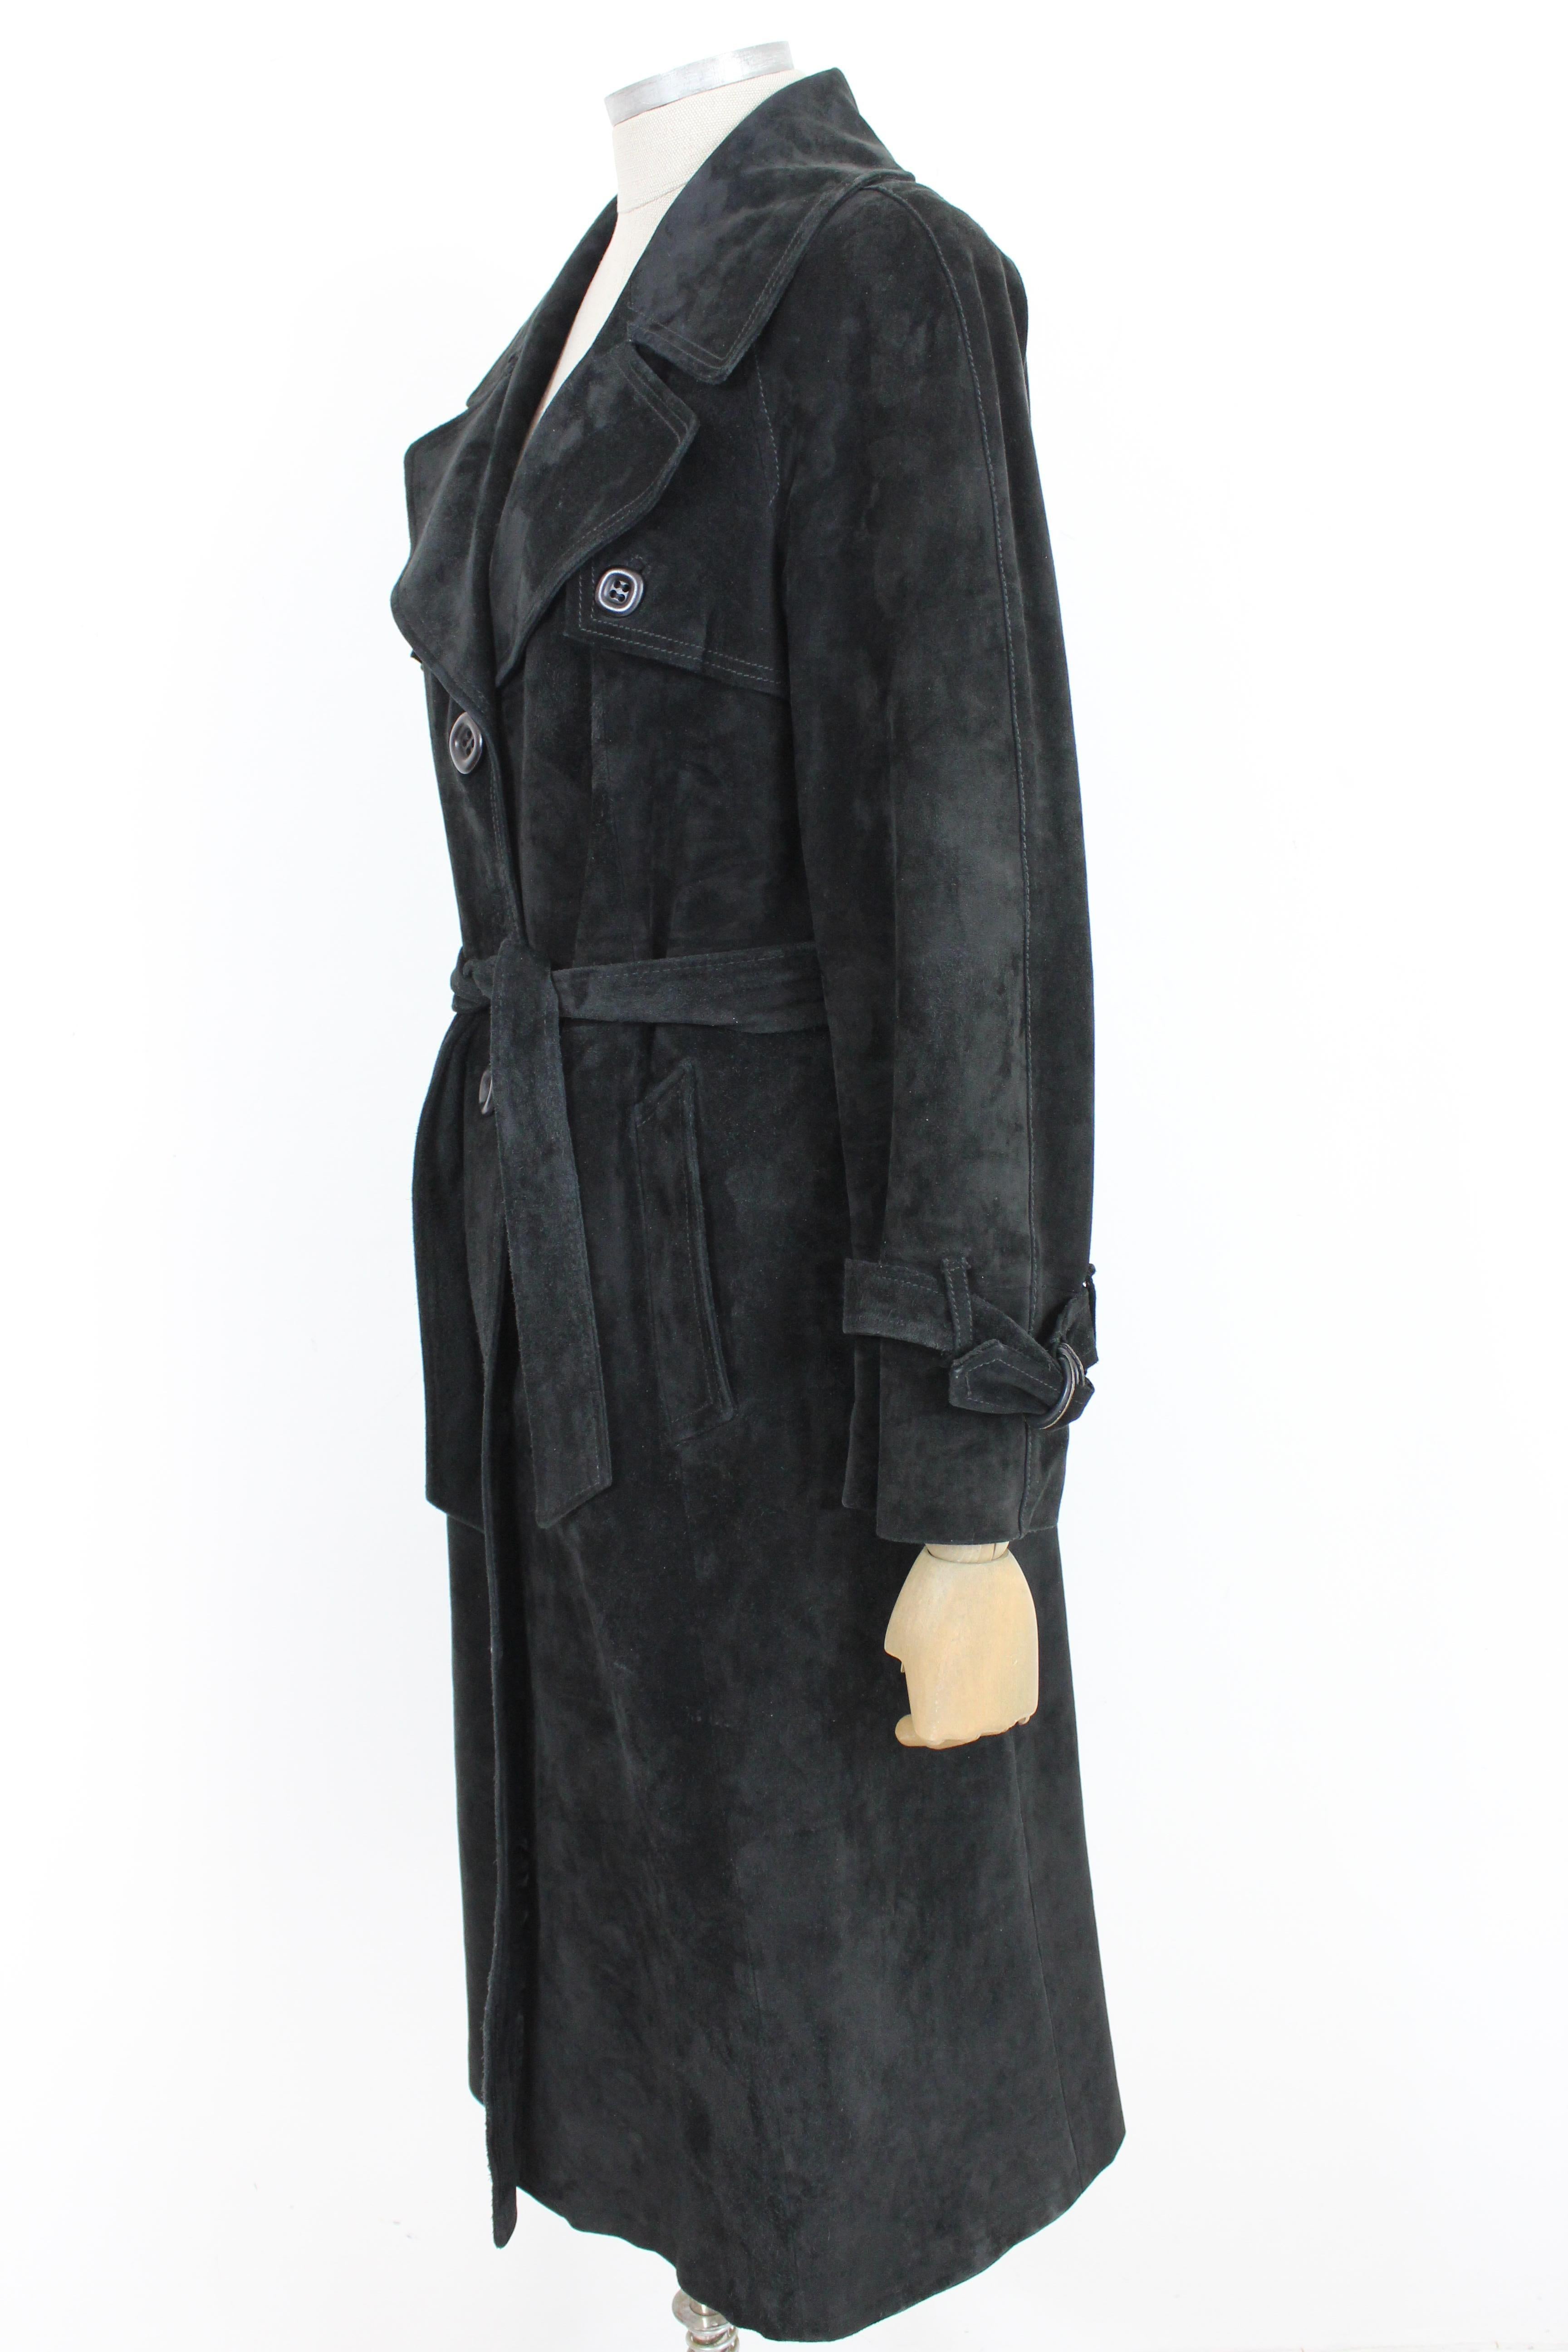 Suede Leather Black Vintage Trench Coat 1